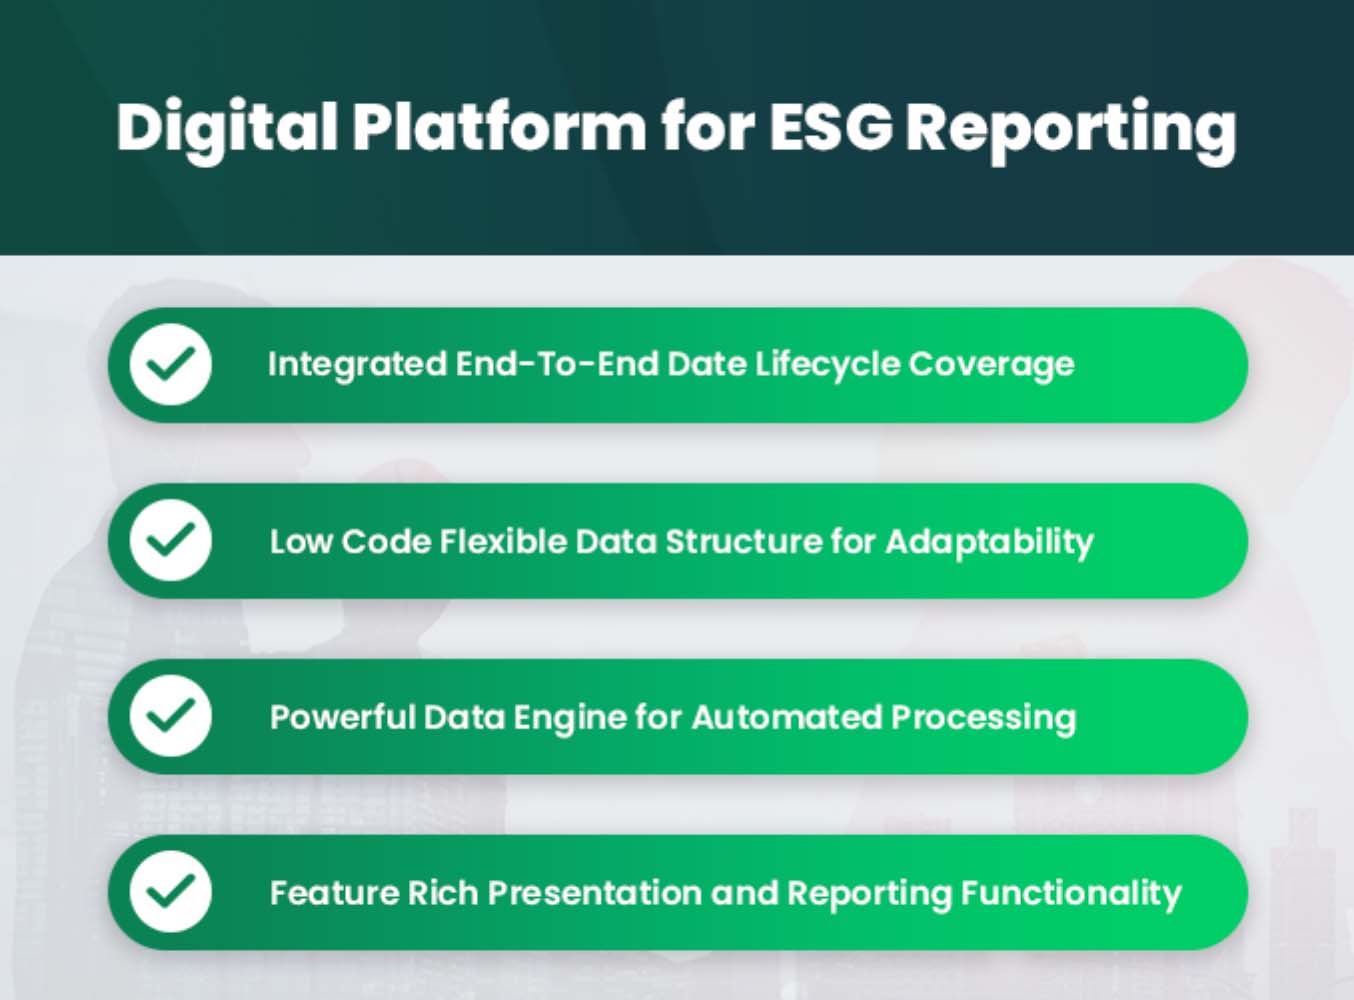 What to look for in an ESG reporting tool